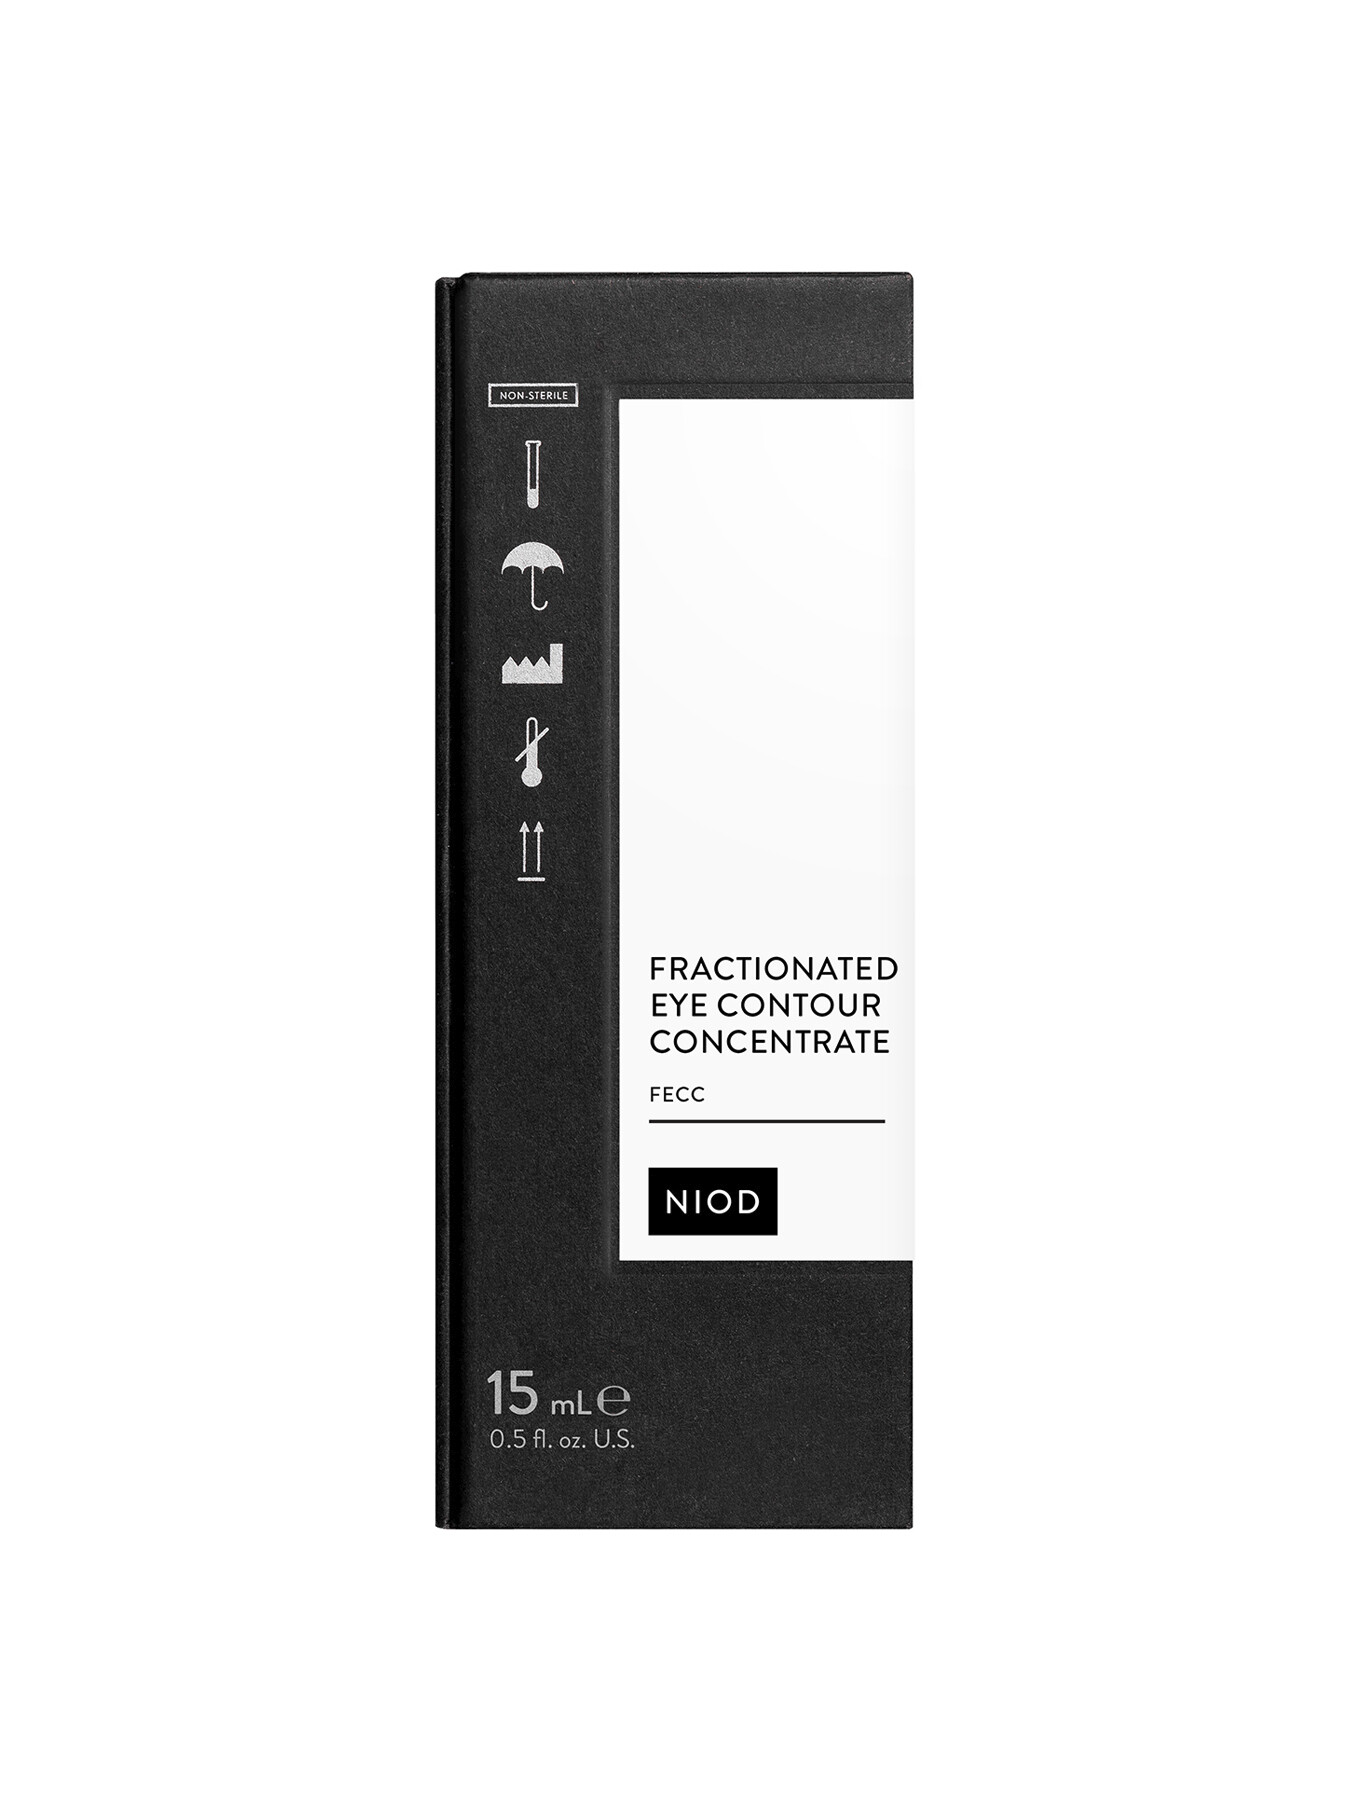 NIOD Fractionated Eye Contour Concentrate | Fenwick